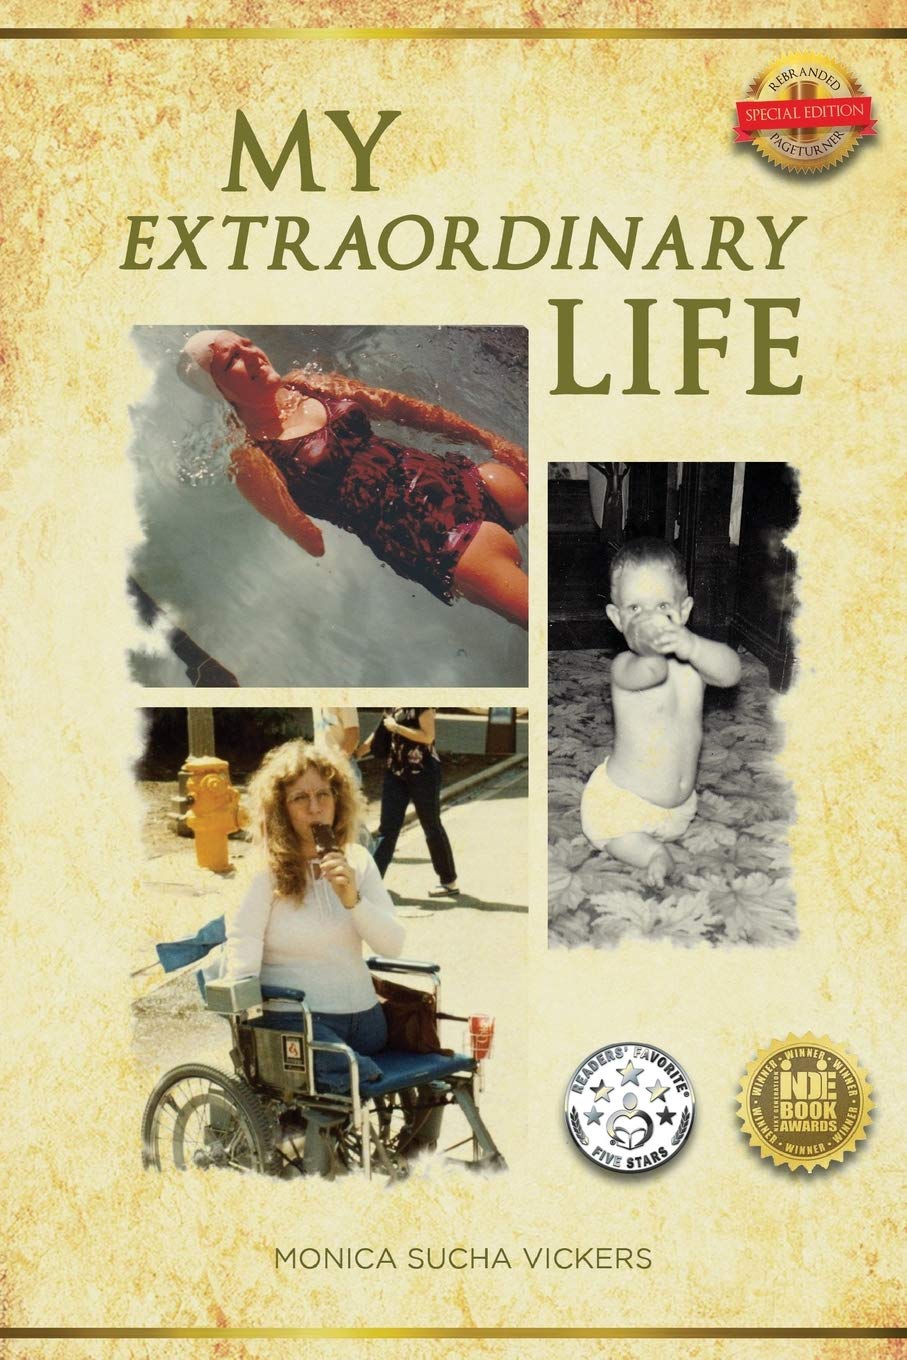 Author’s Tranquility Press Supports Monica Sucha Vickers’s My Extraordinary Life